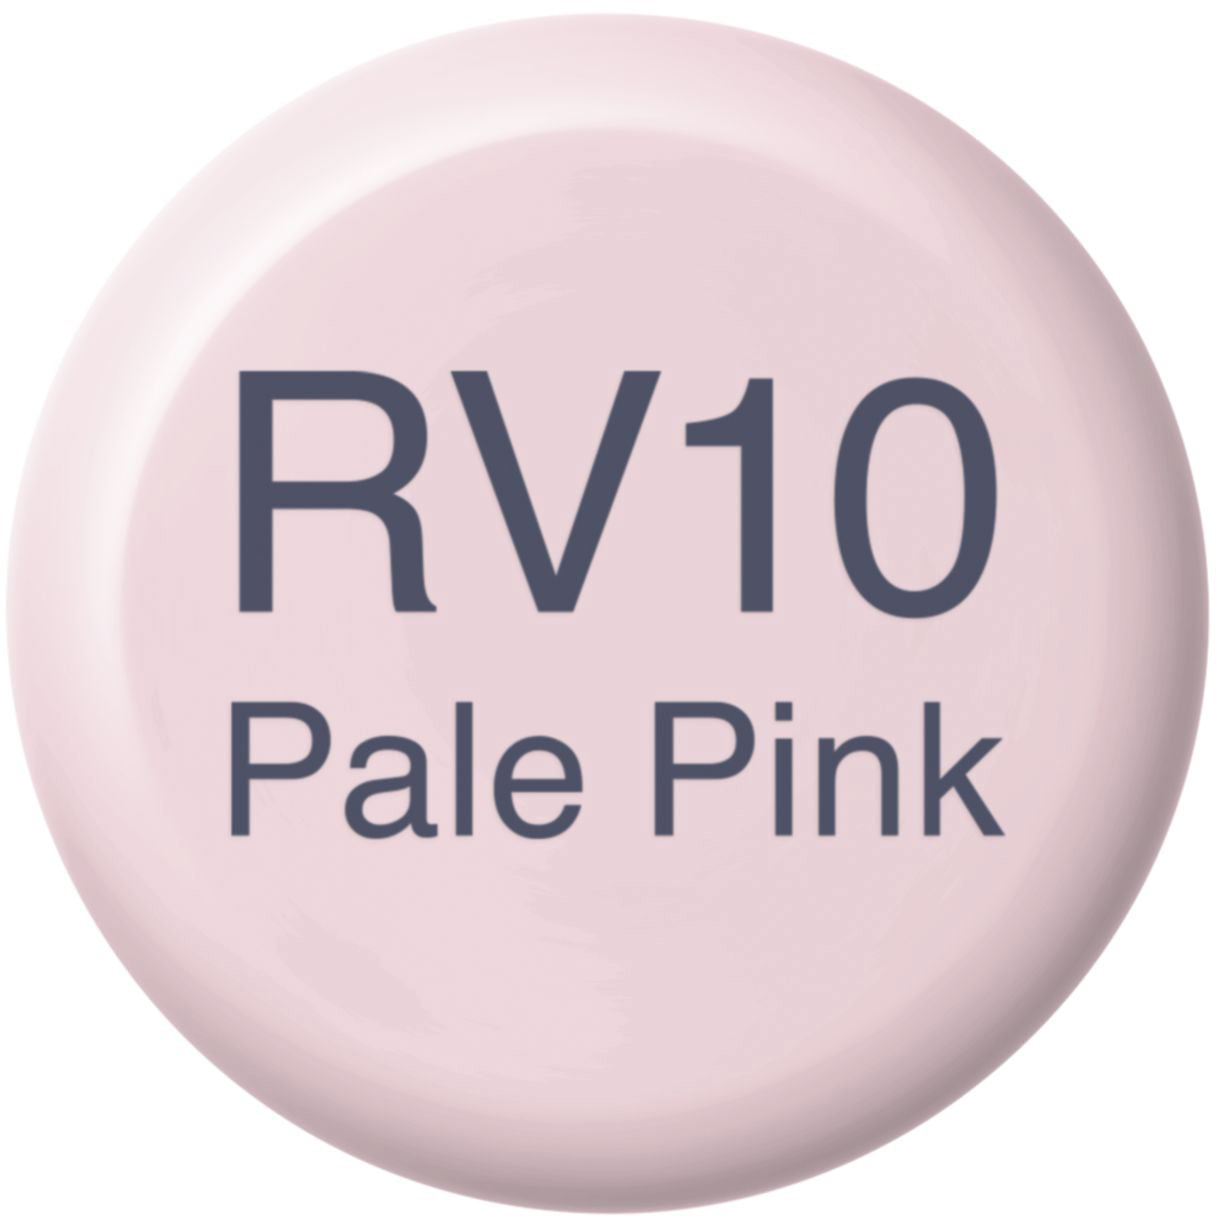 COPIC Ink Refill 21076177 RV10 - Pale Pink